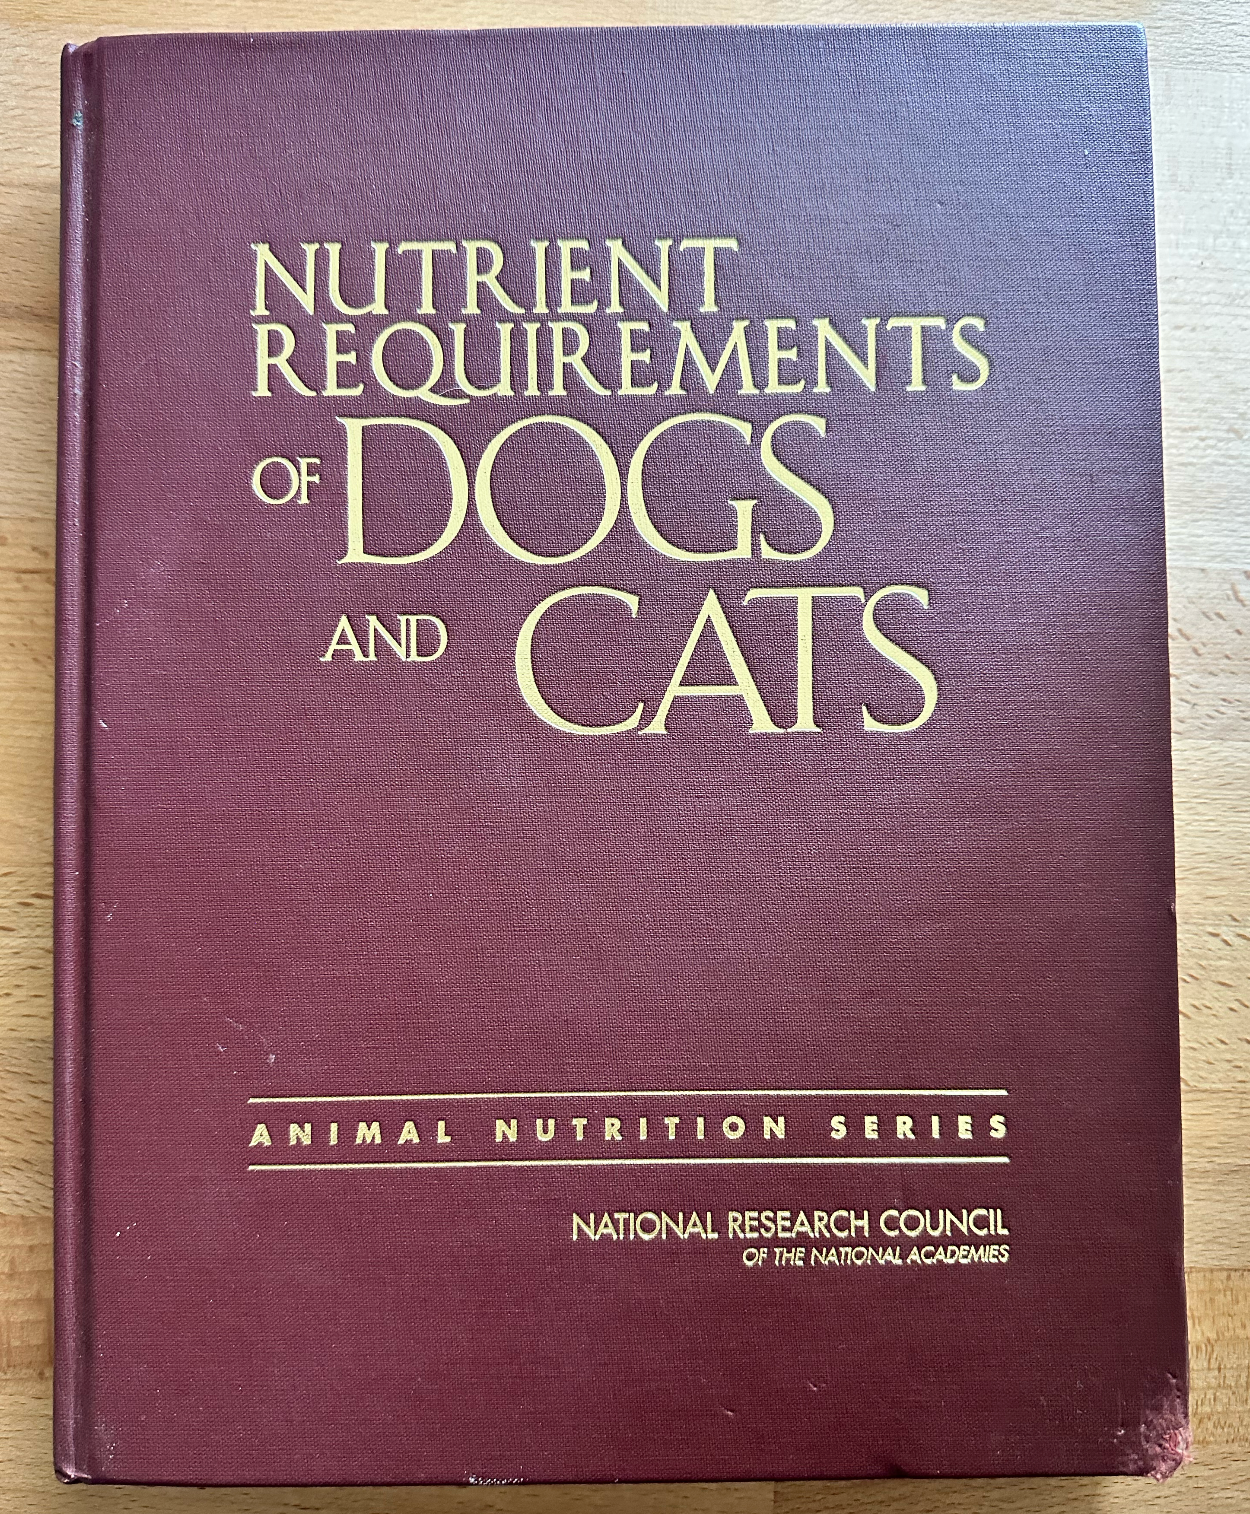 a book titled nutrient requirements of dogs and cats is sitting on a wooden table .